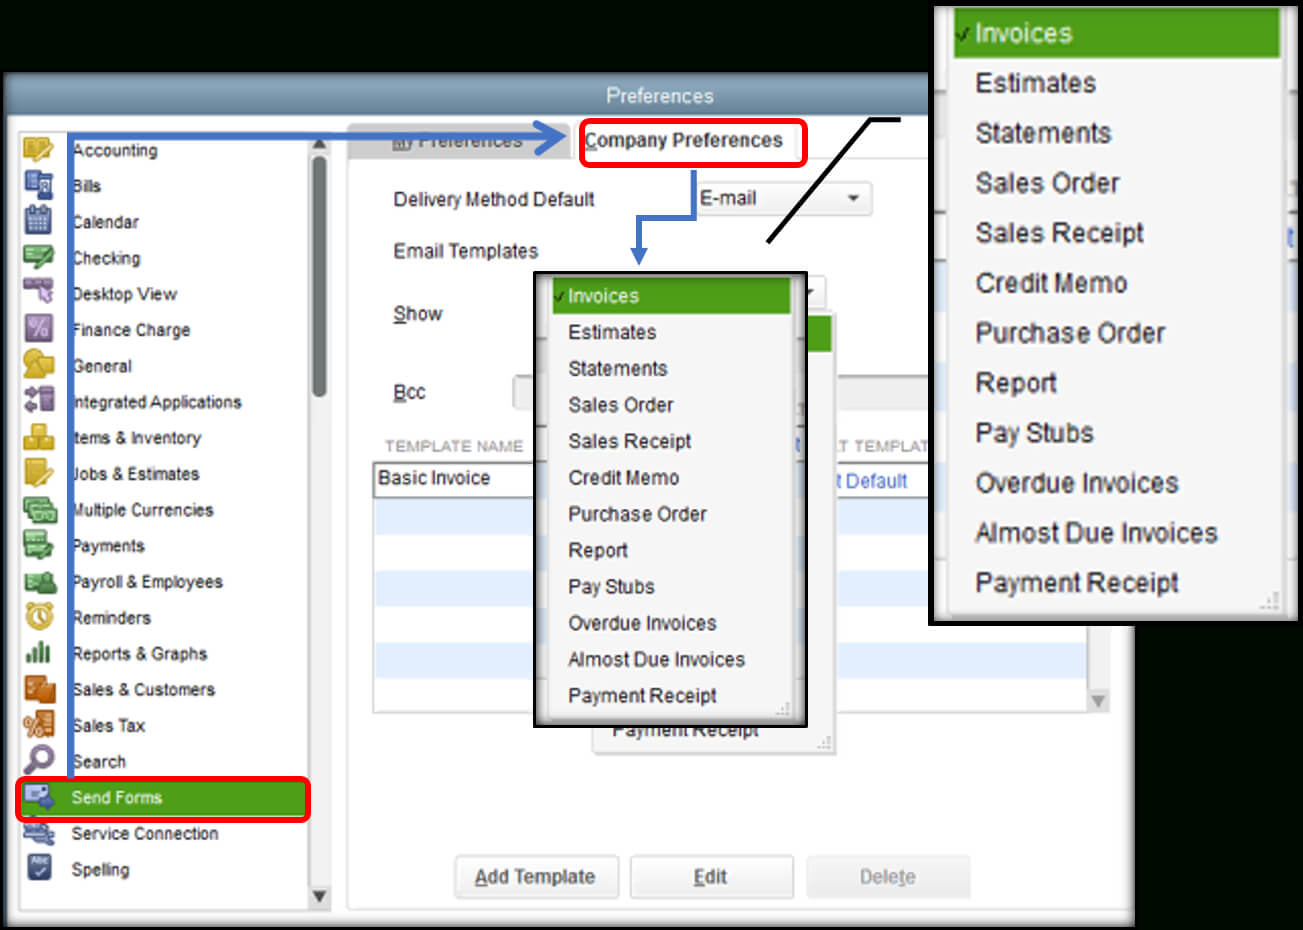 Customise Email Templates In Quickbooks - Quickbooks Community Within Quick Book Reports Templates